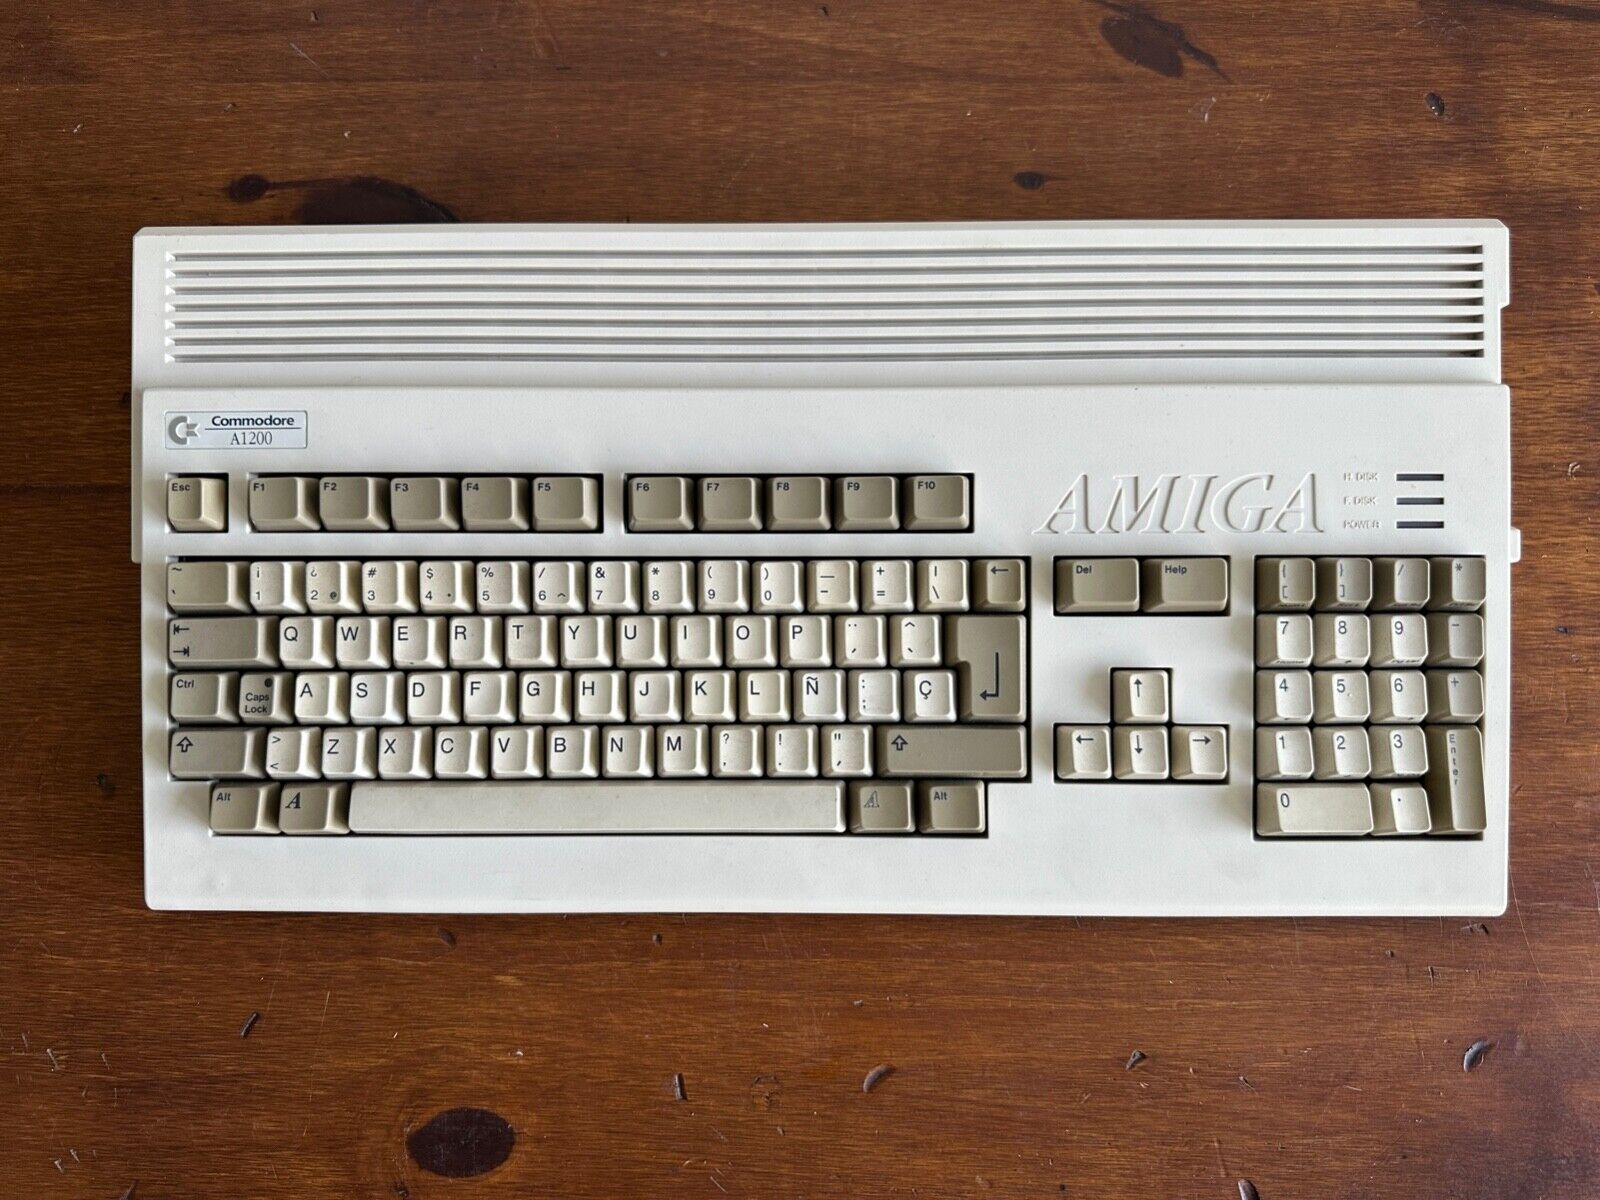 A1200 Commodore Amiga 1200 Vintage Computer AS-IS for parts or repairs. PAL